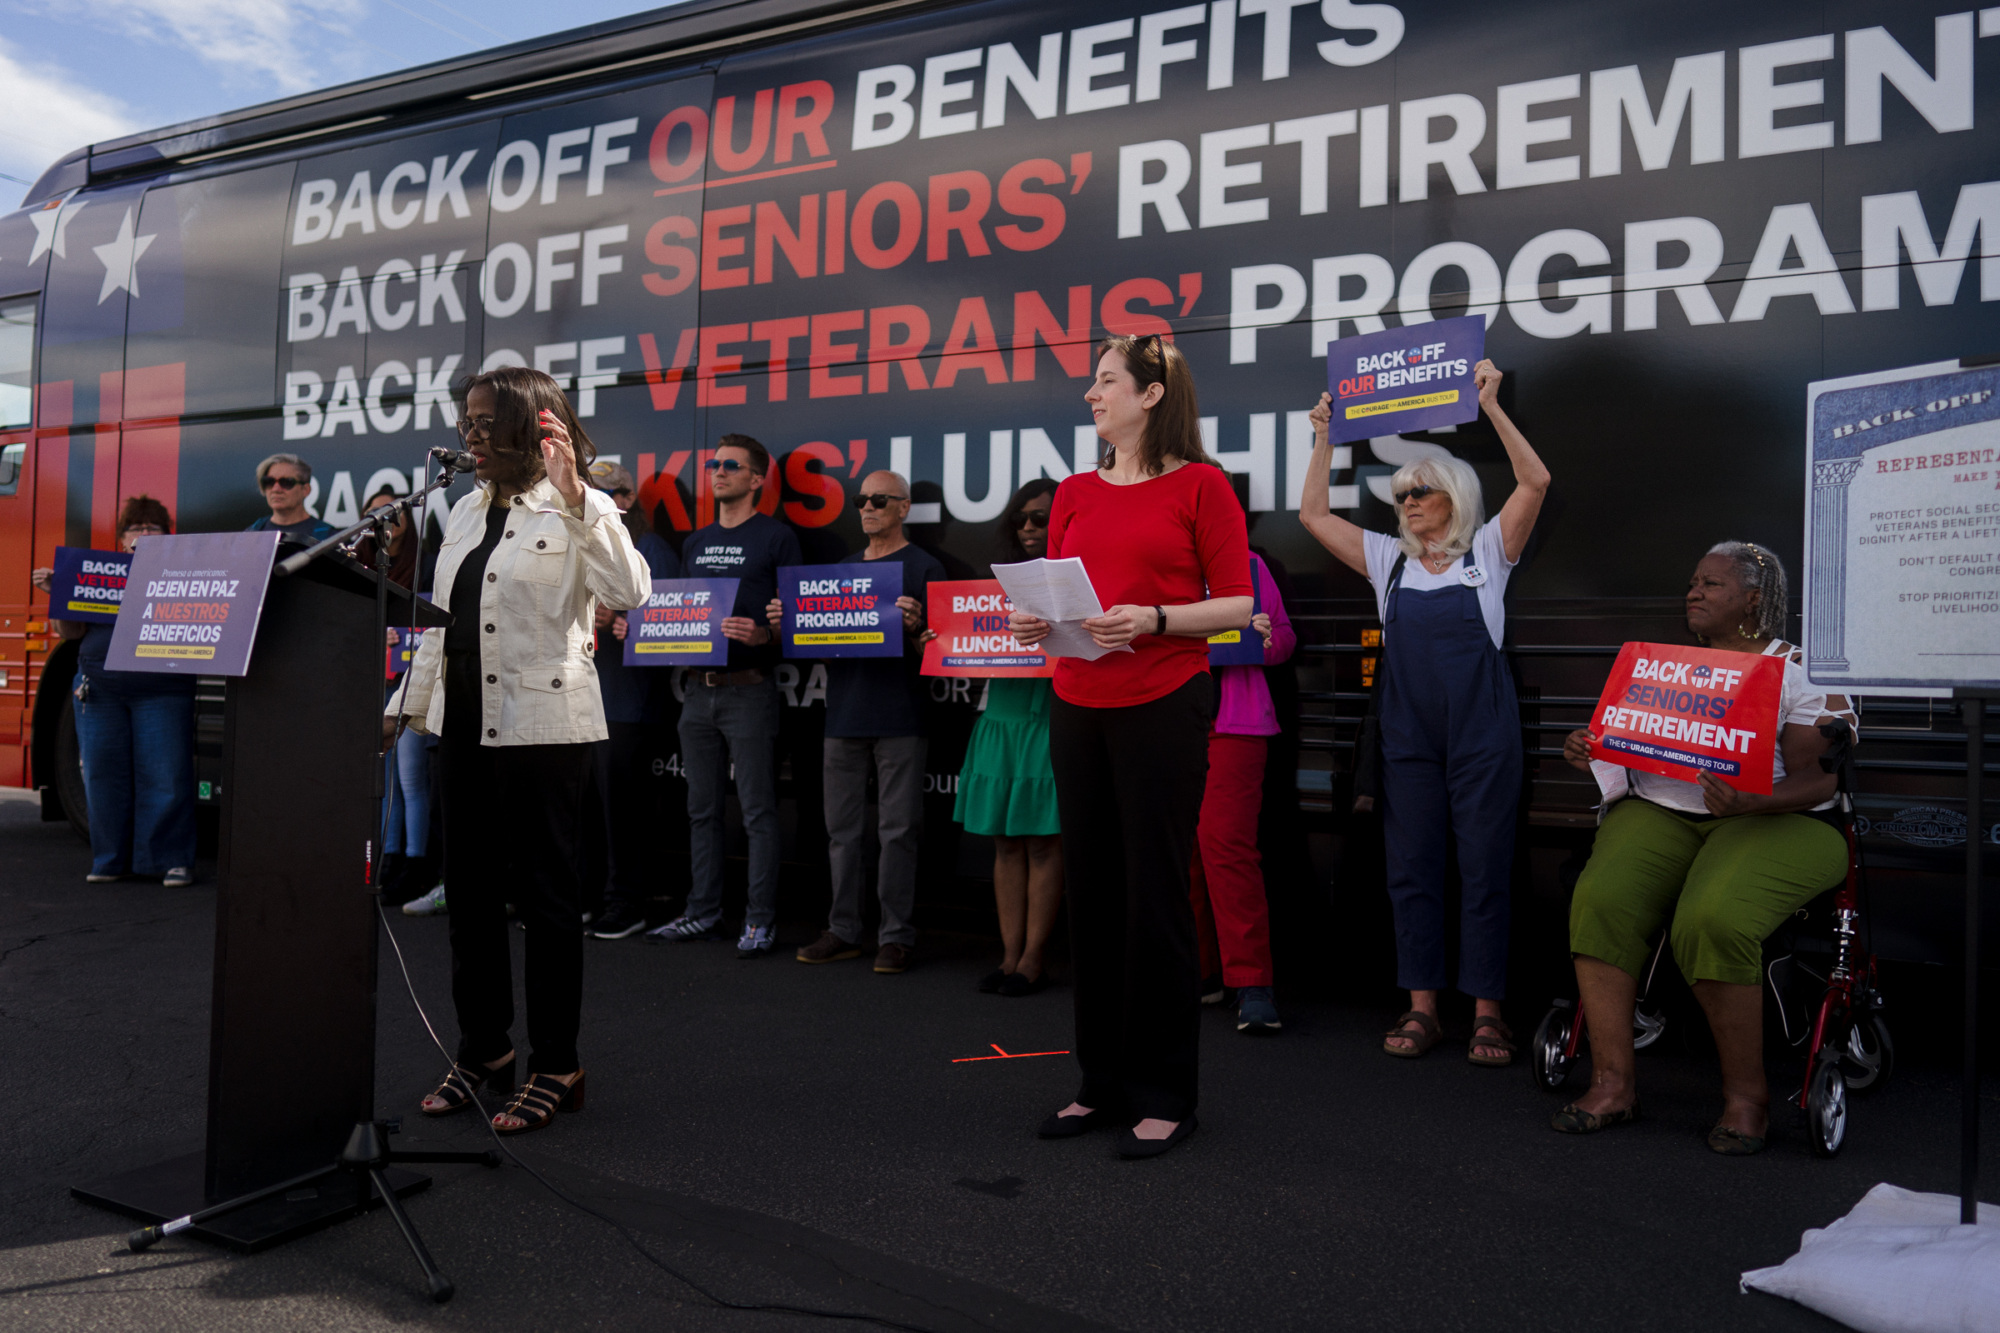 Courage for America leaders speak in front of the Back Off Our Benefits Bus in Phoenix, AZ.